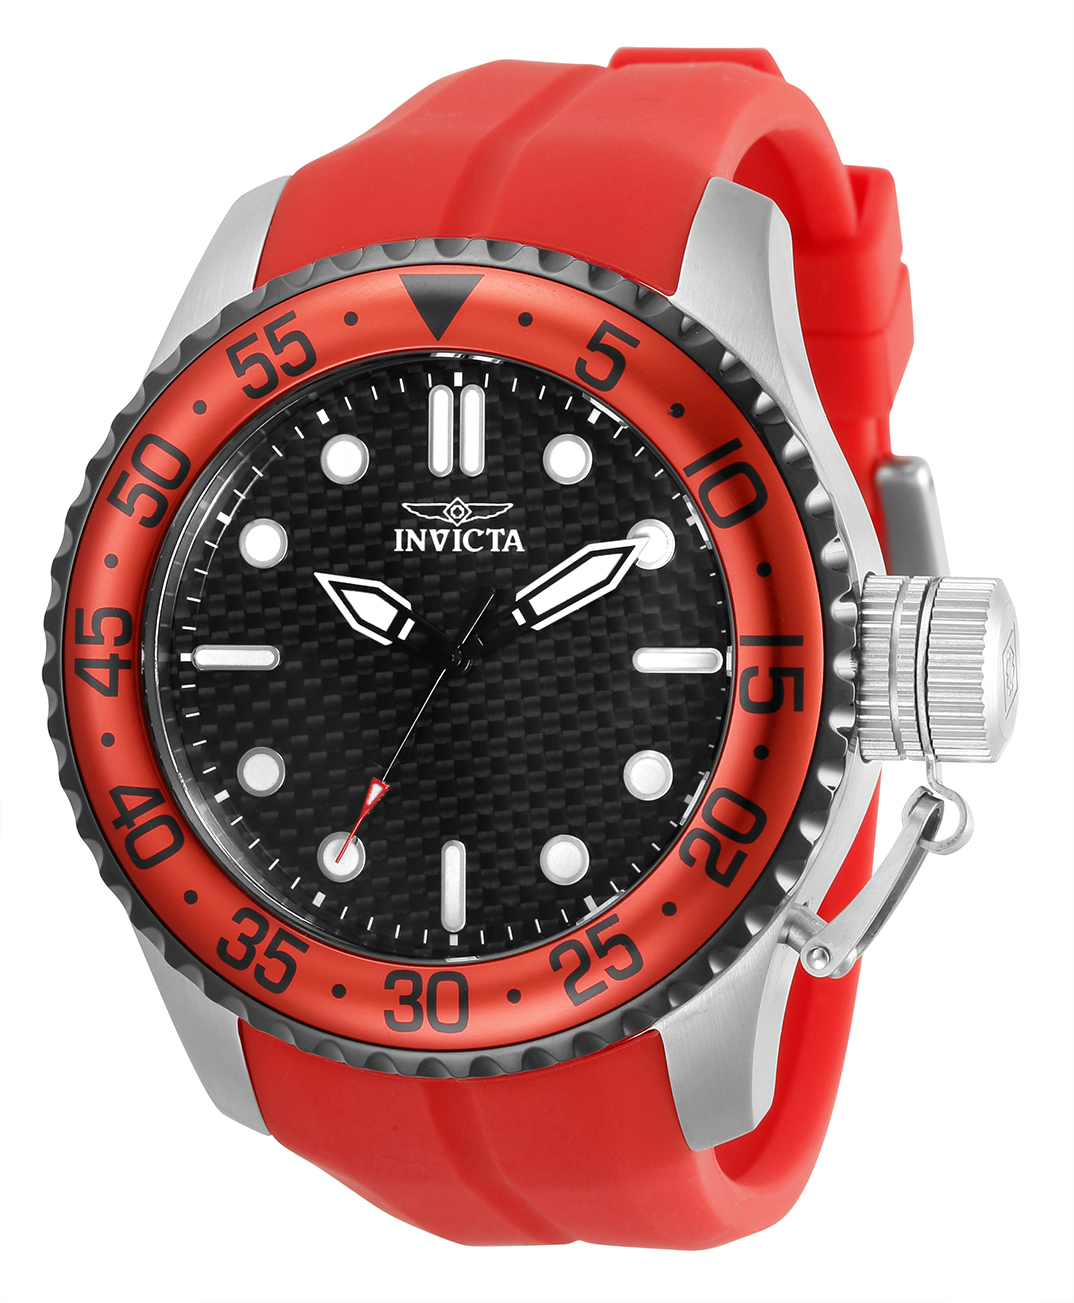 Invicta Pro Diver Men's Watch - 50mm, Red (34423) - Watch Review